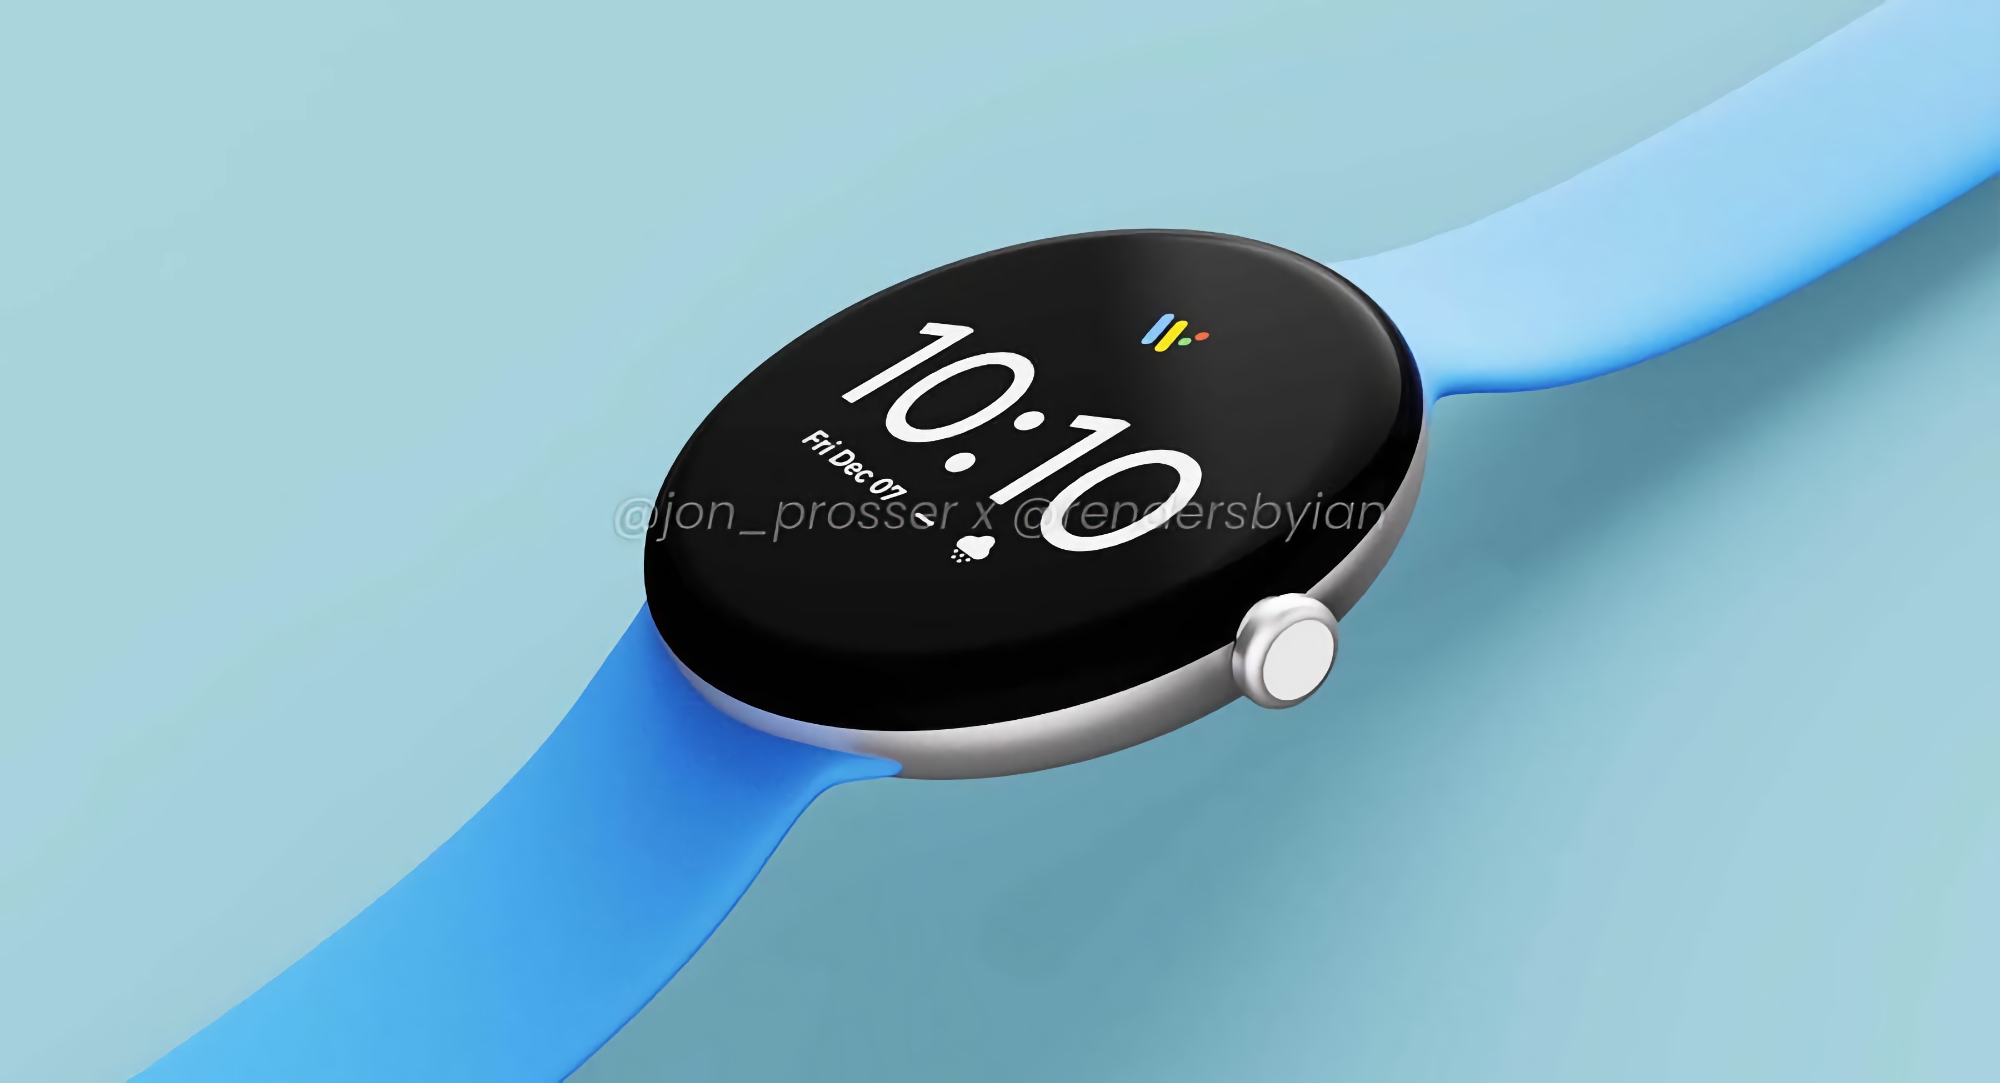 Source: Google Pixel Watch will get three colors, 32 GB storage and LTE support